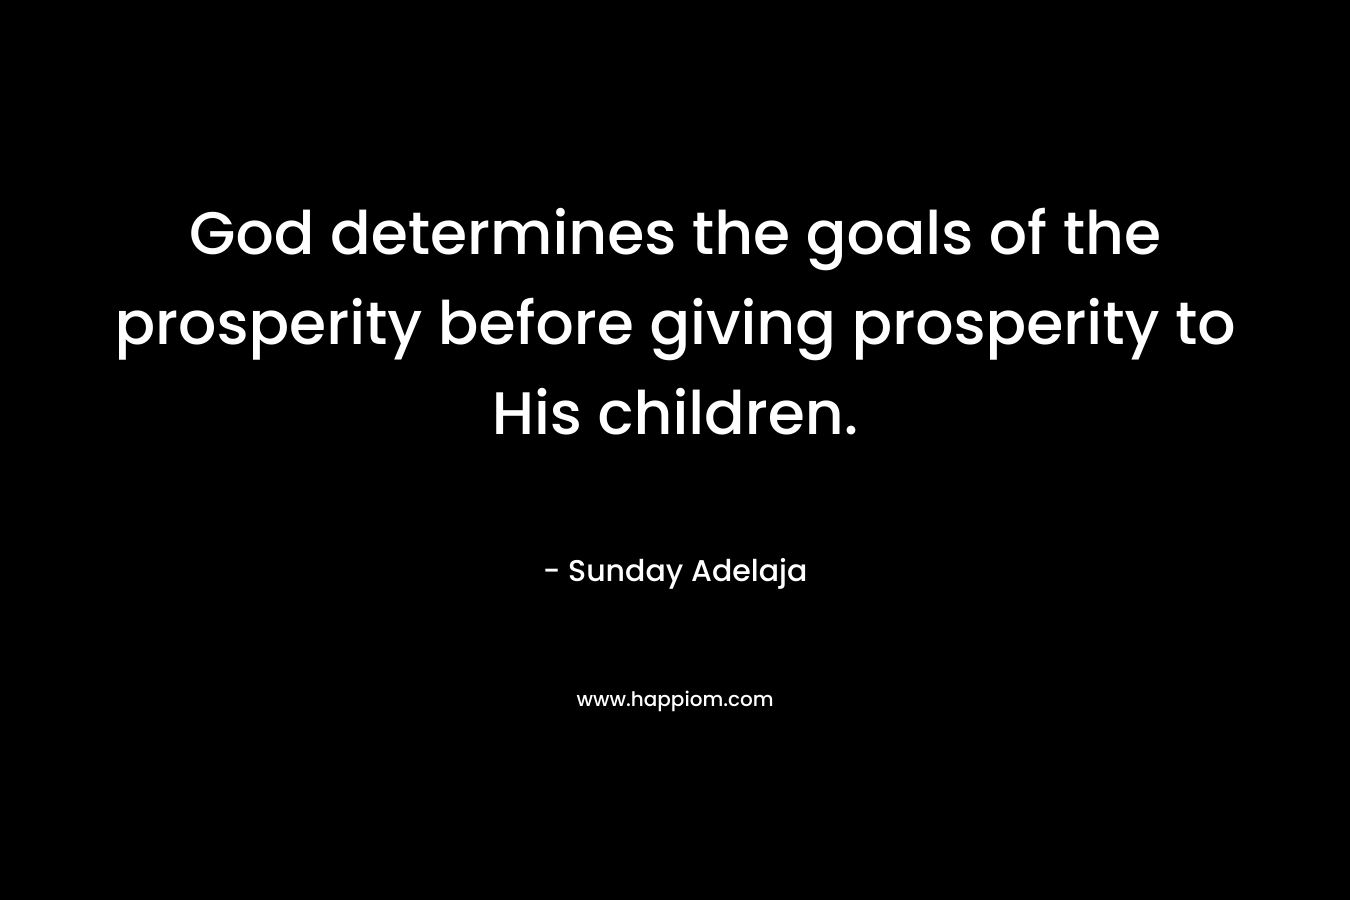 God determines the goals of the prosperity before giving prosperity to His children.